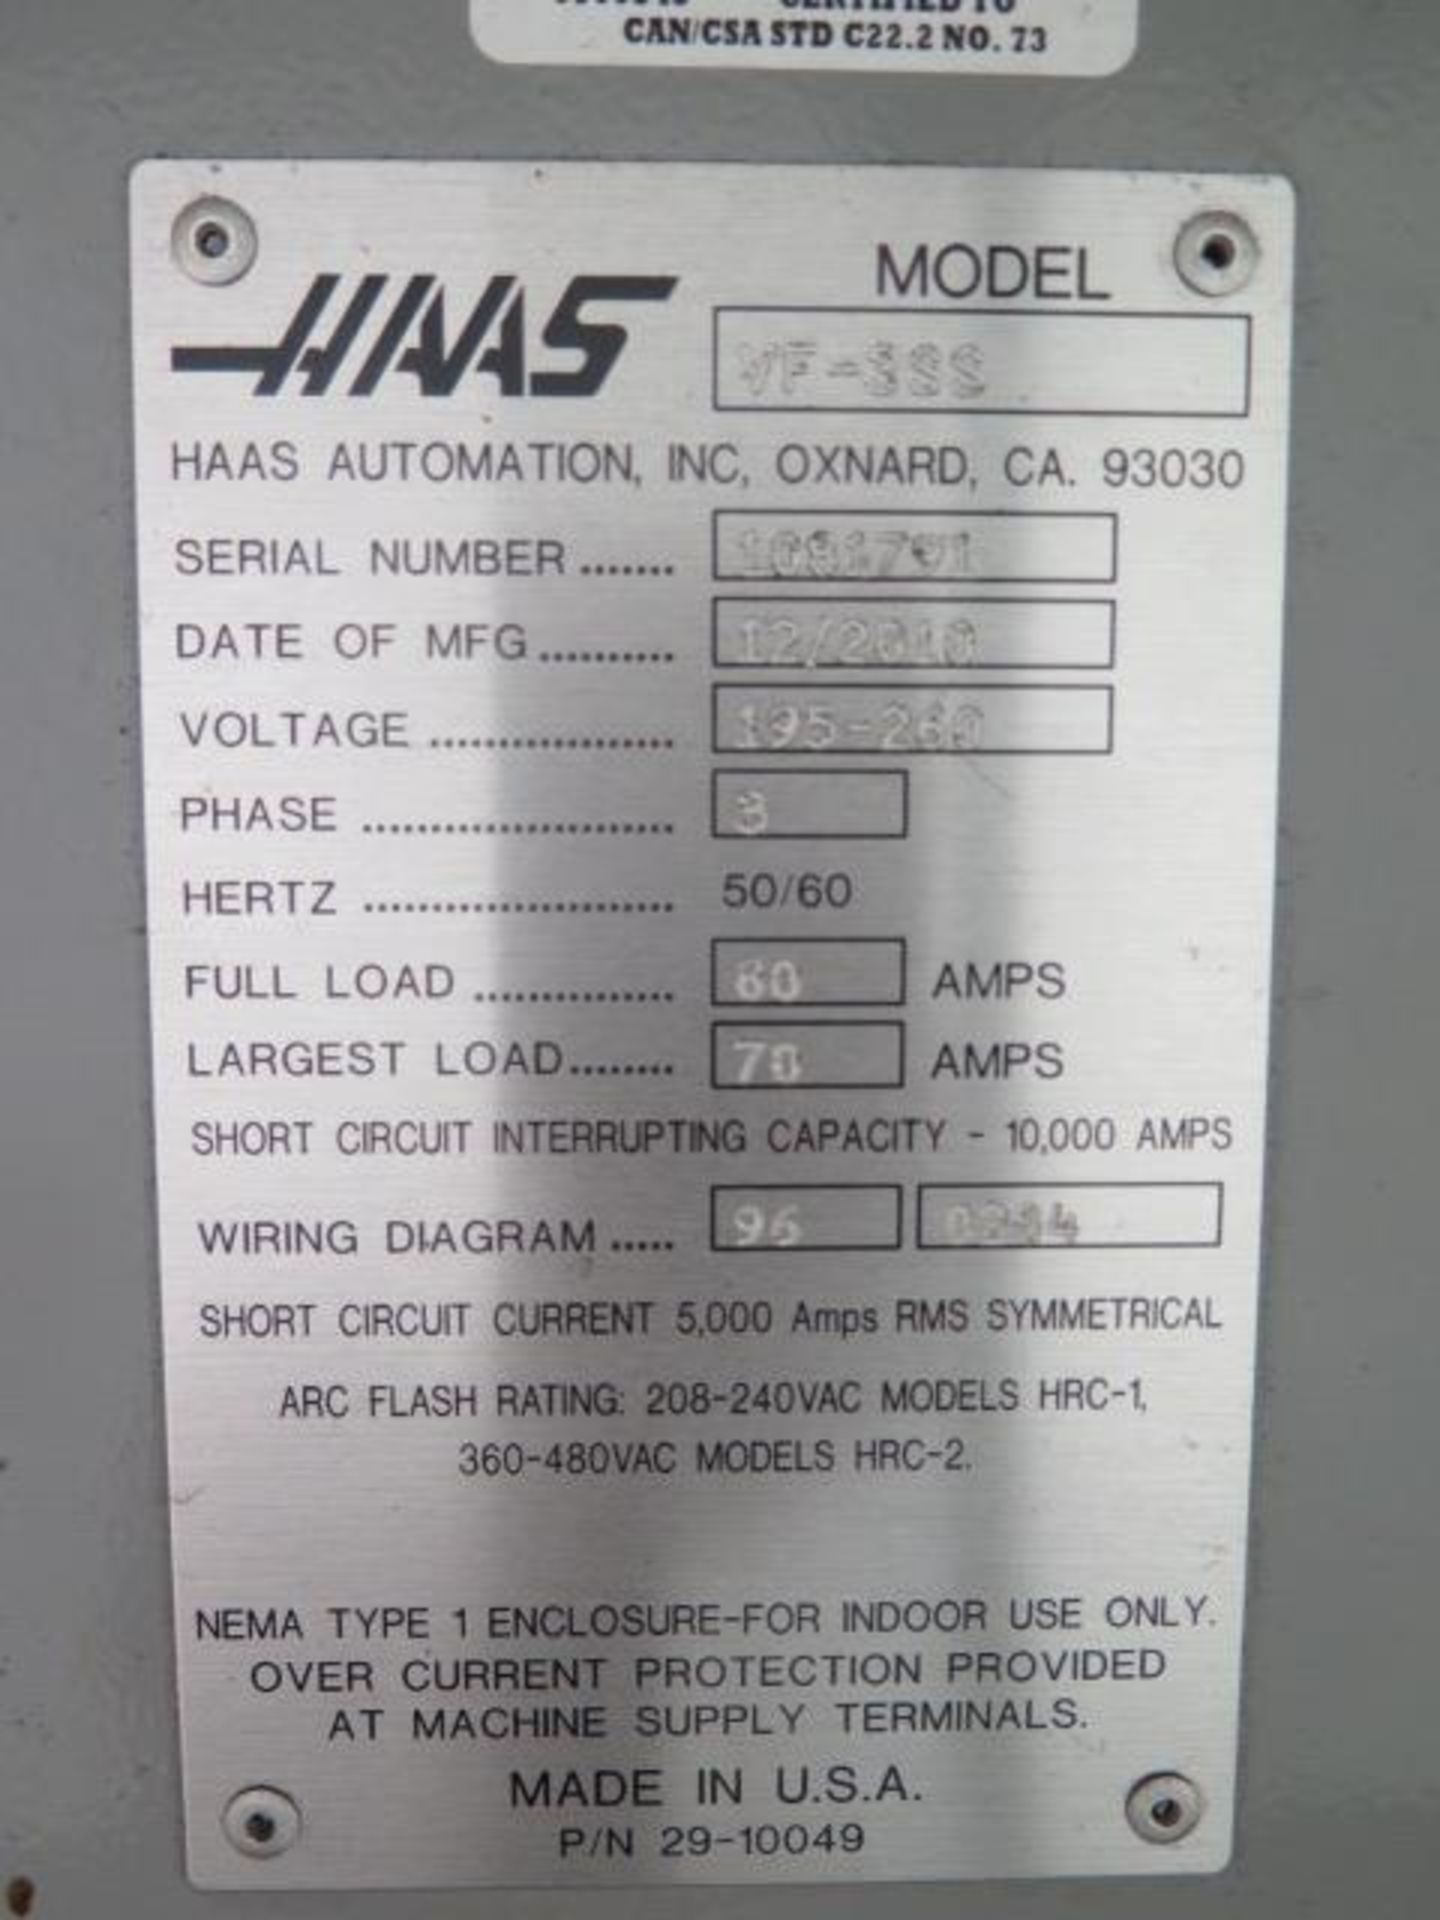 2010 Haas VF-3SS 4-Axis CNC VMC s/n 1081791 w/ Haas Controls, 24 ATC, SOLD AS IS, LIVERMORE, CA - Image 18 of 18